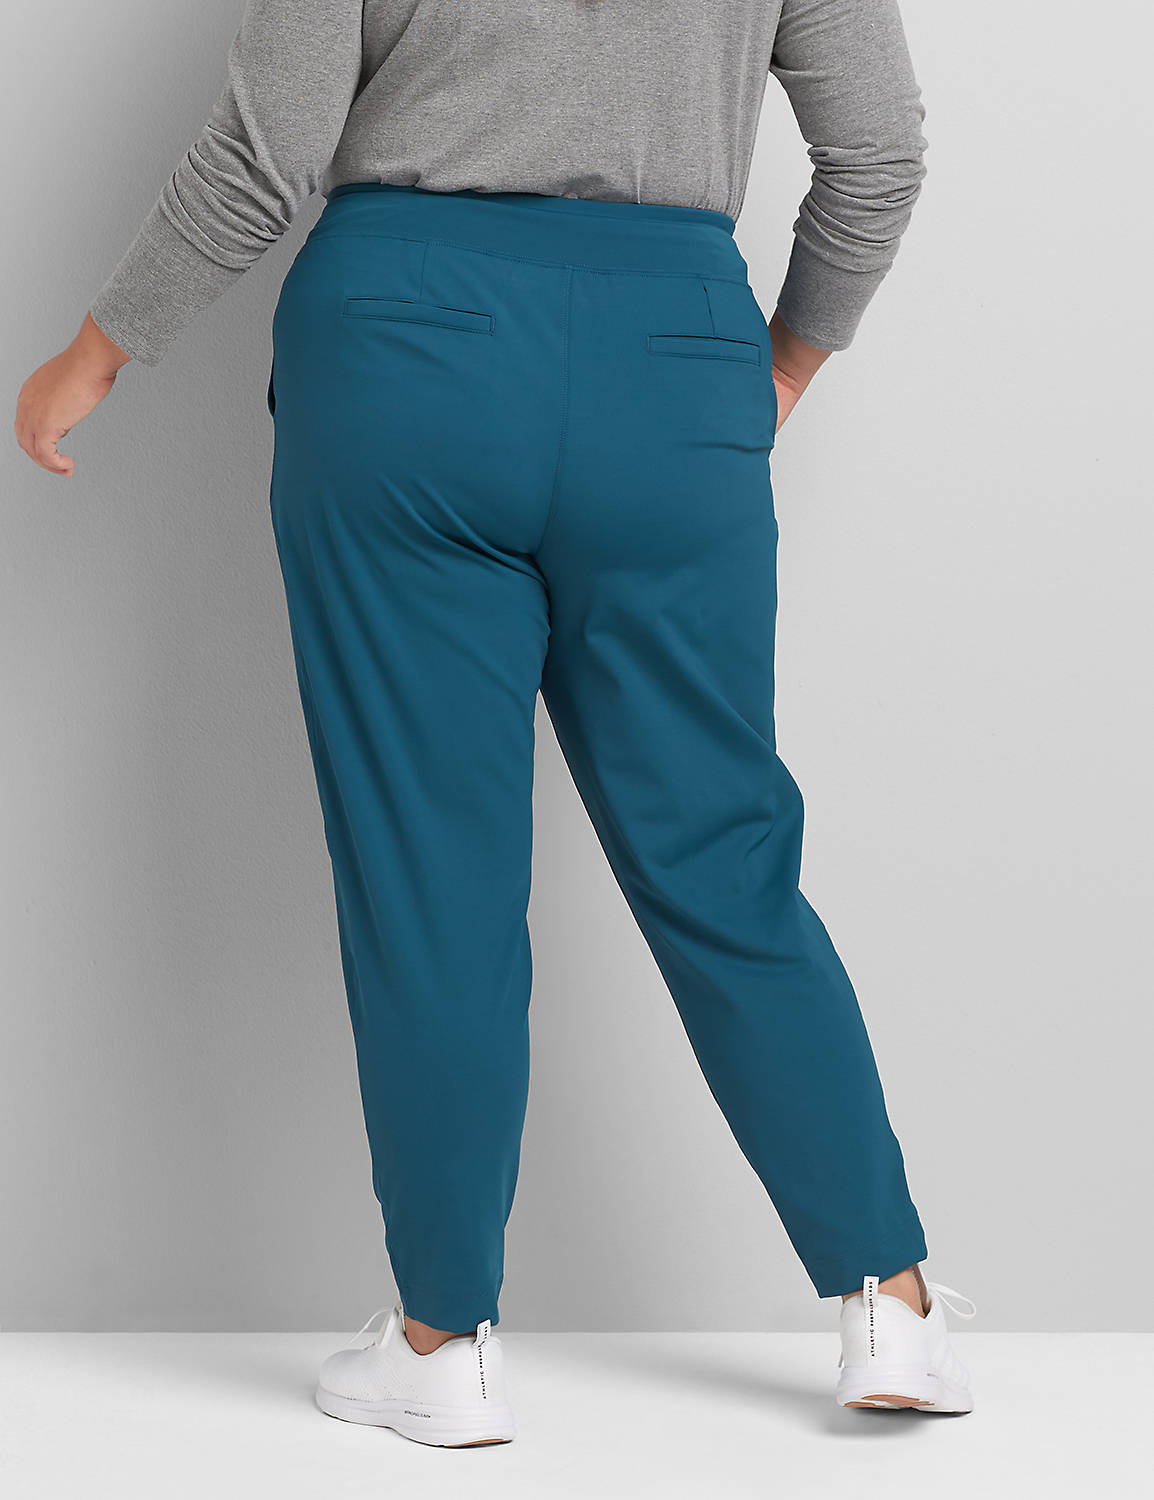 Knit Trouser F 1118054:PANTONE Deep Teal:22/24 Product Image 2